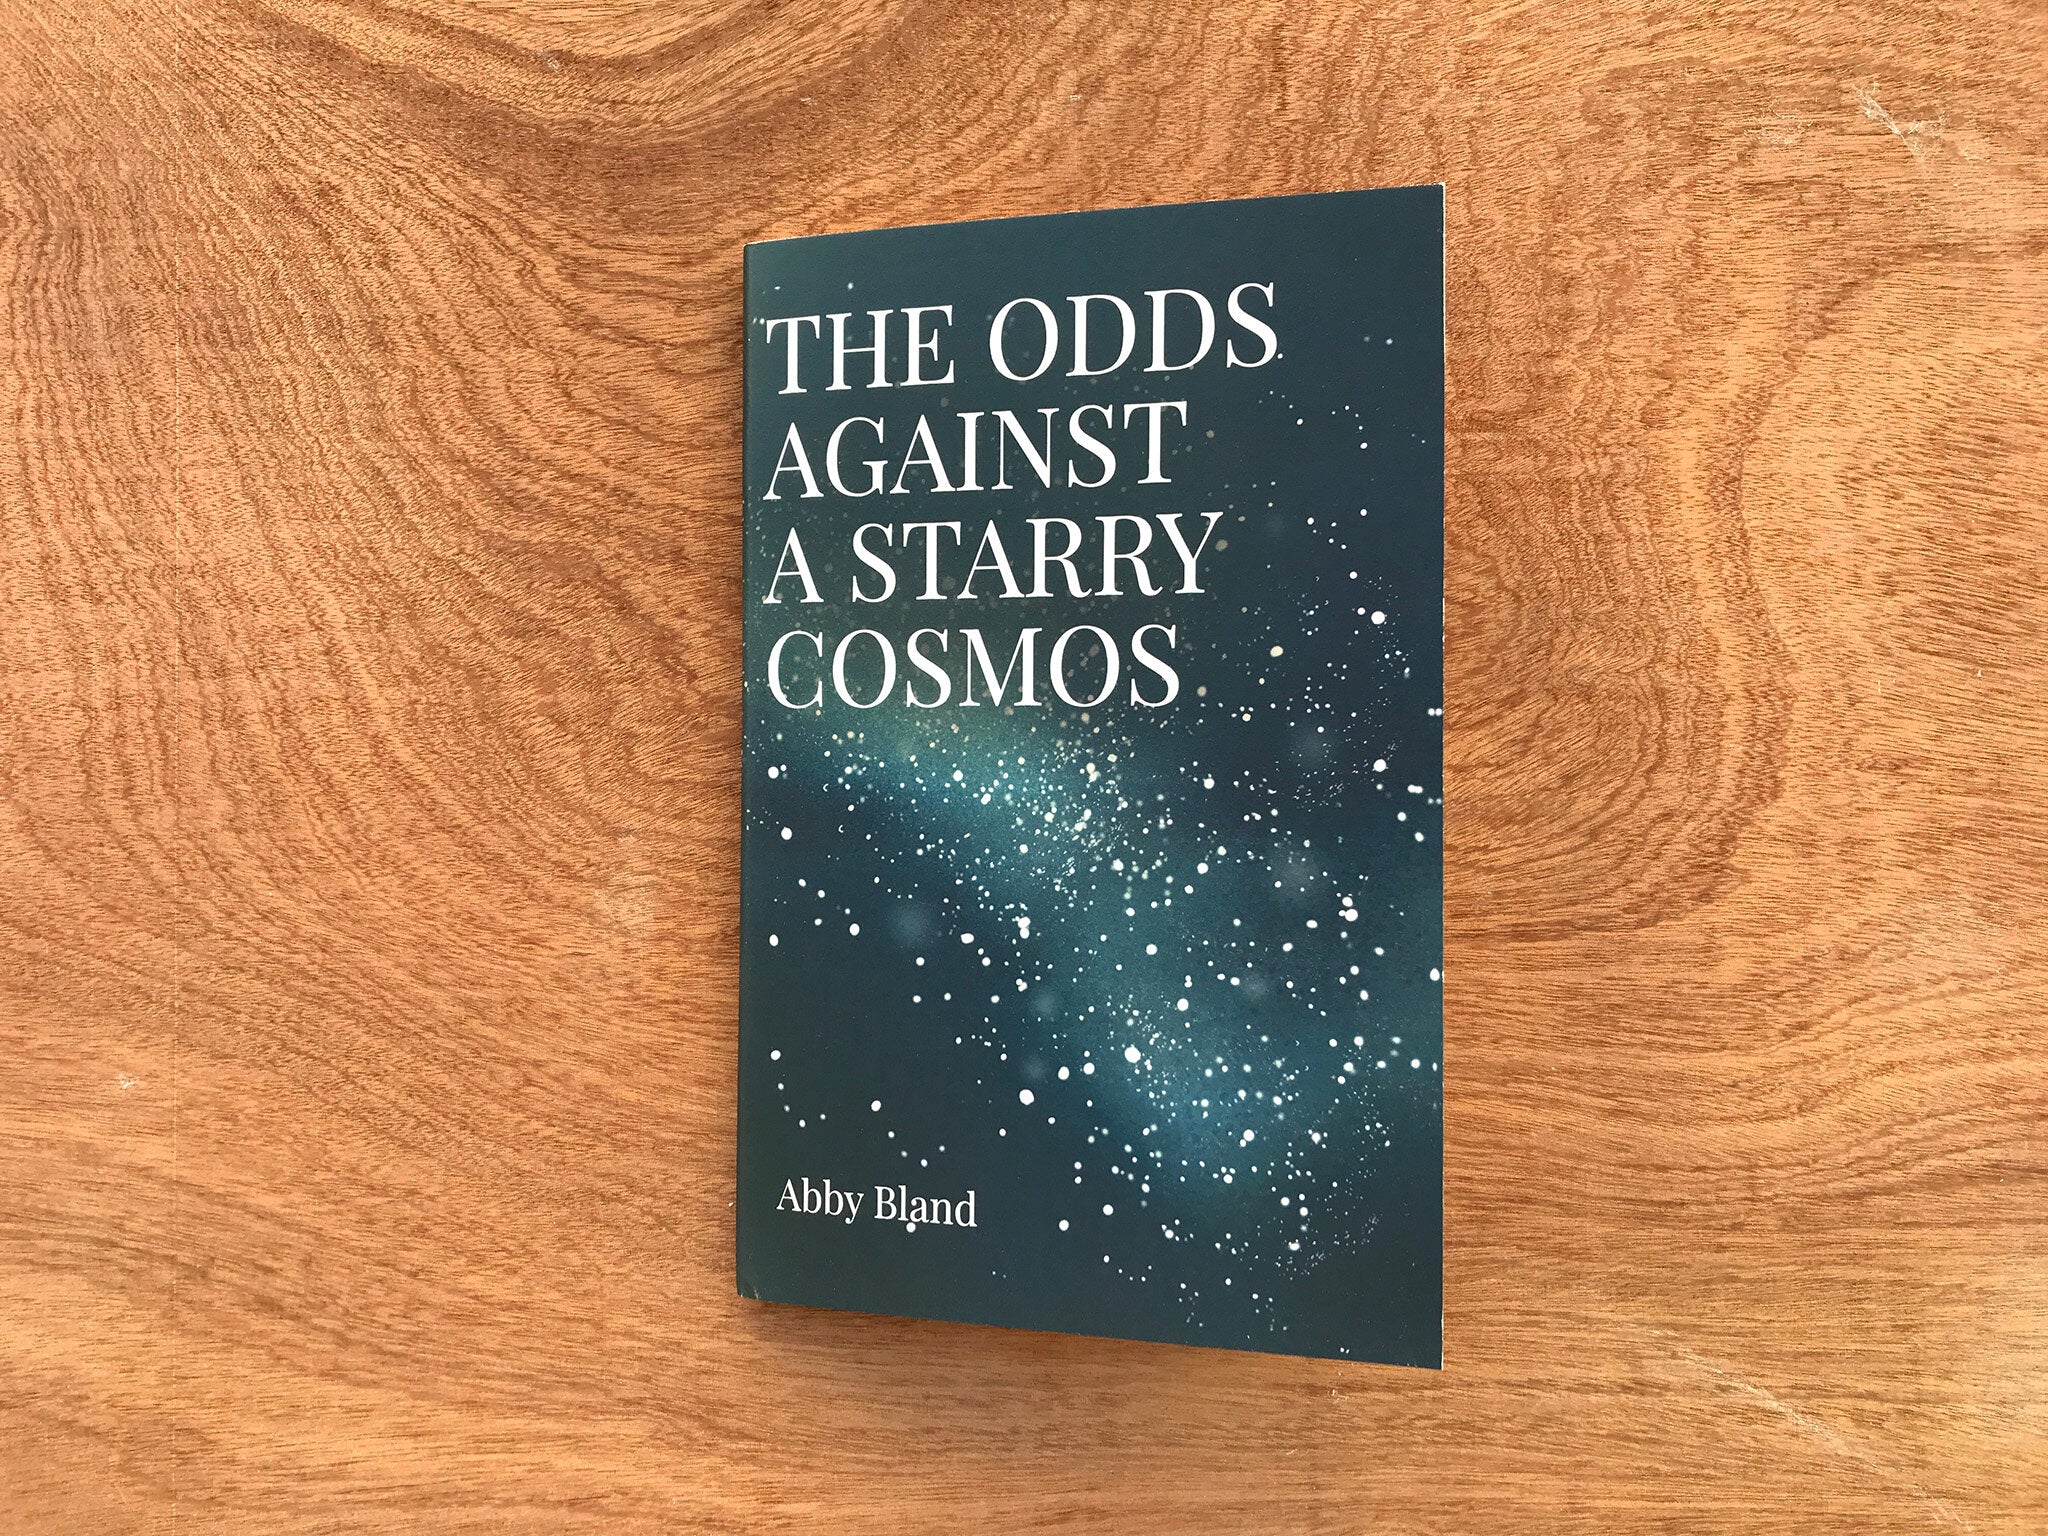 THE ODDS AGAINST A STARRY COSMOS by Abby Bland